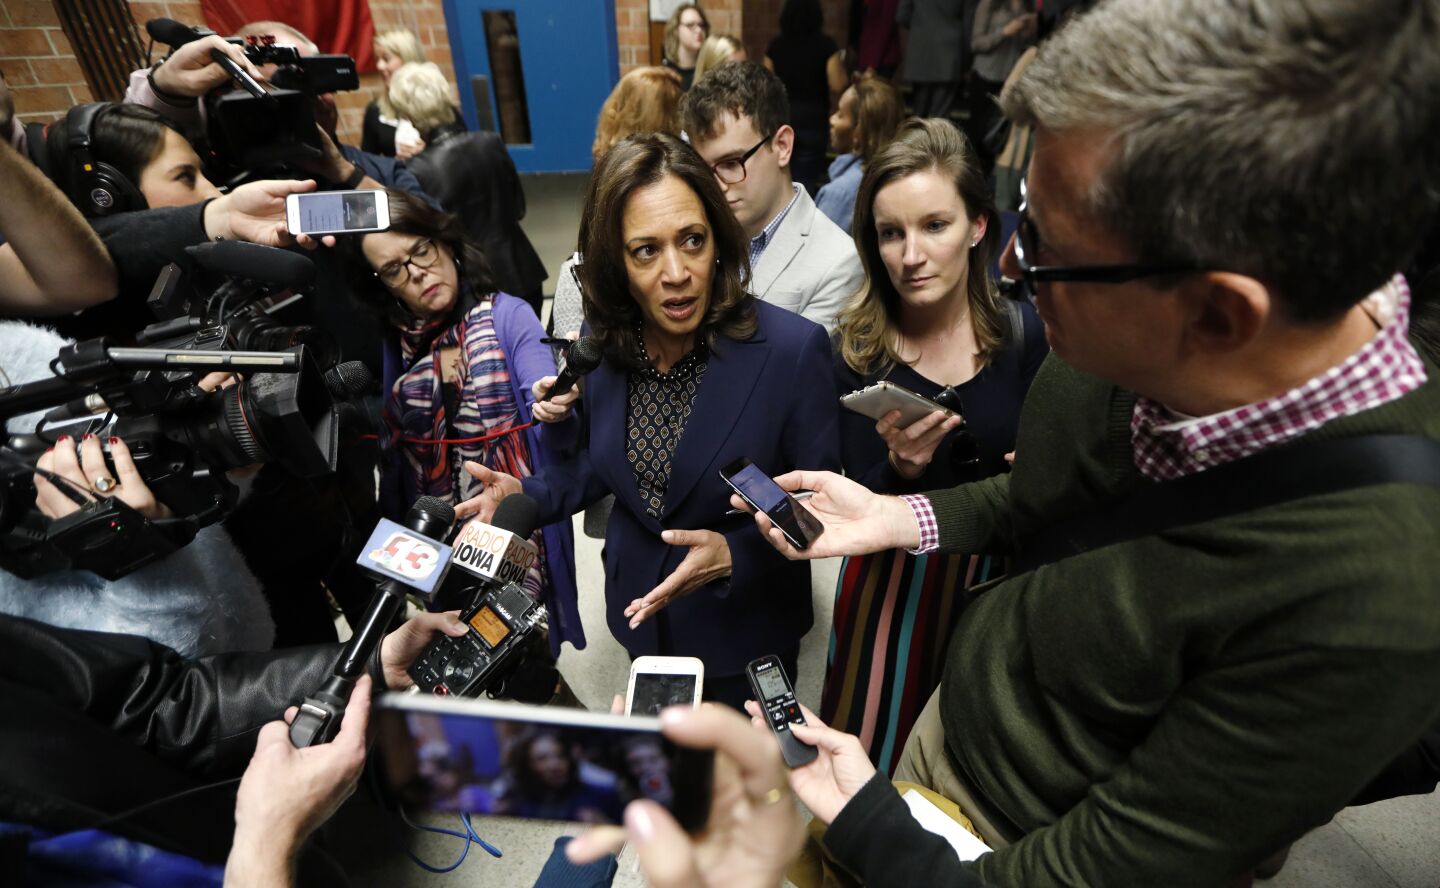 Oct. 22, 2018: Sen. Kamala Harris speaks to reporters following a get out the vote rally in Ankeny, Iowa.